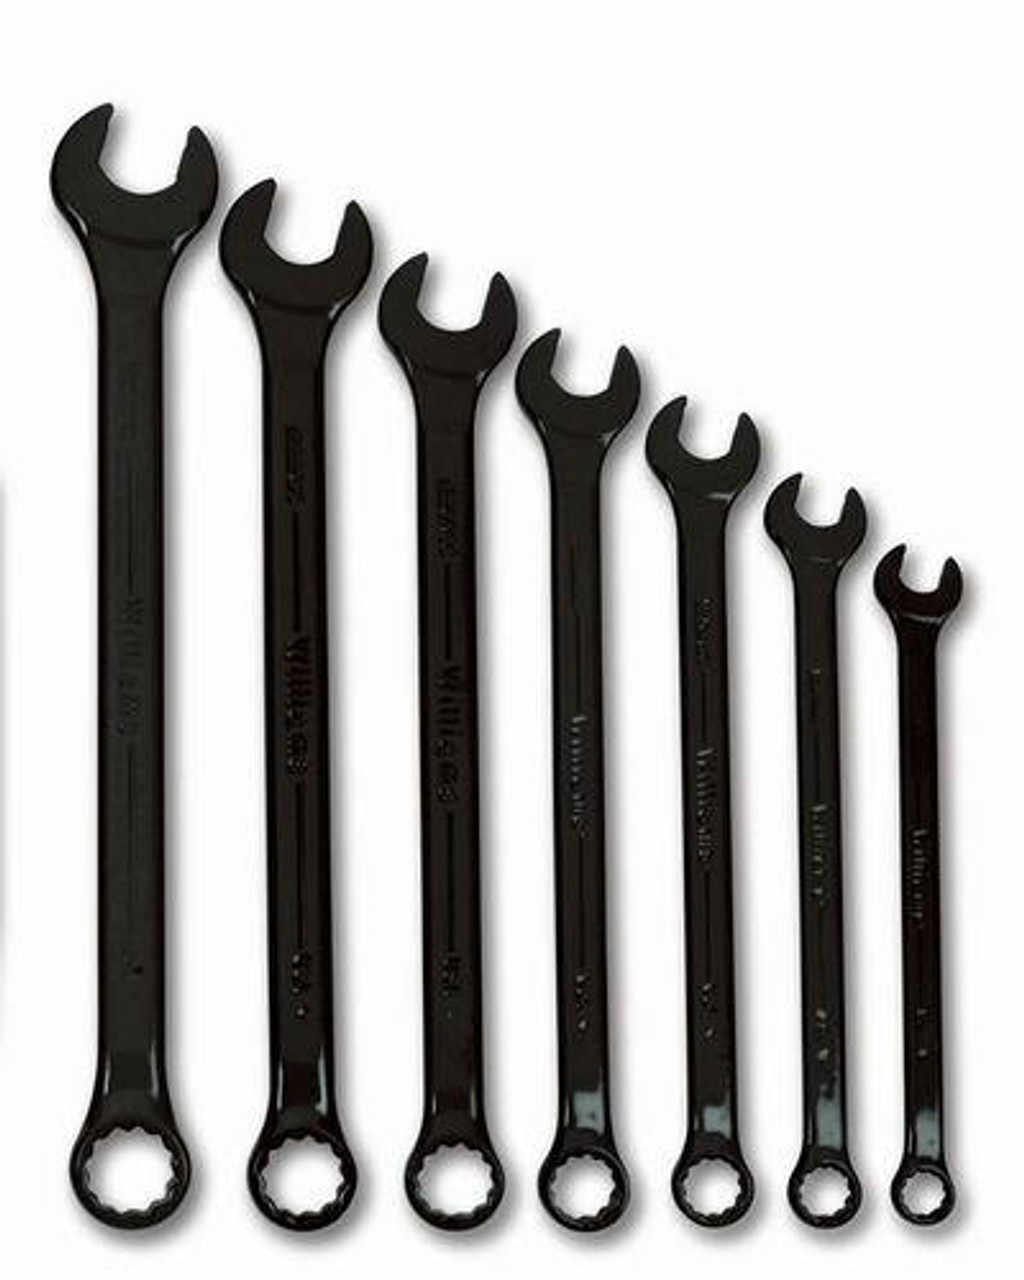 Williams 3/8 - 3/4" Williams Black Combination Wrench Set 7 Psc - WS-1170BSC 